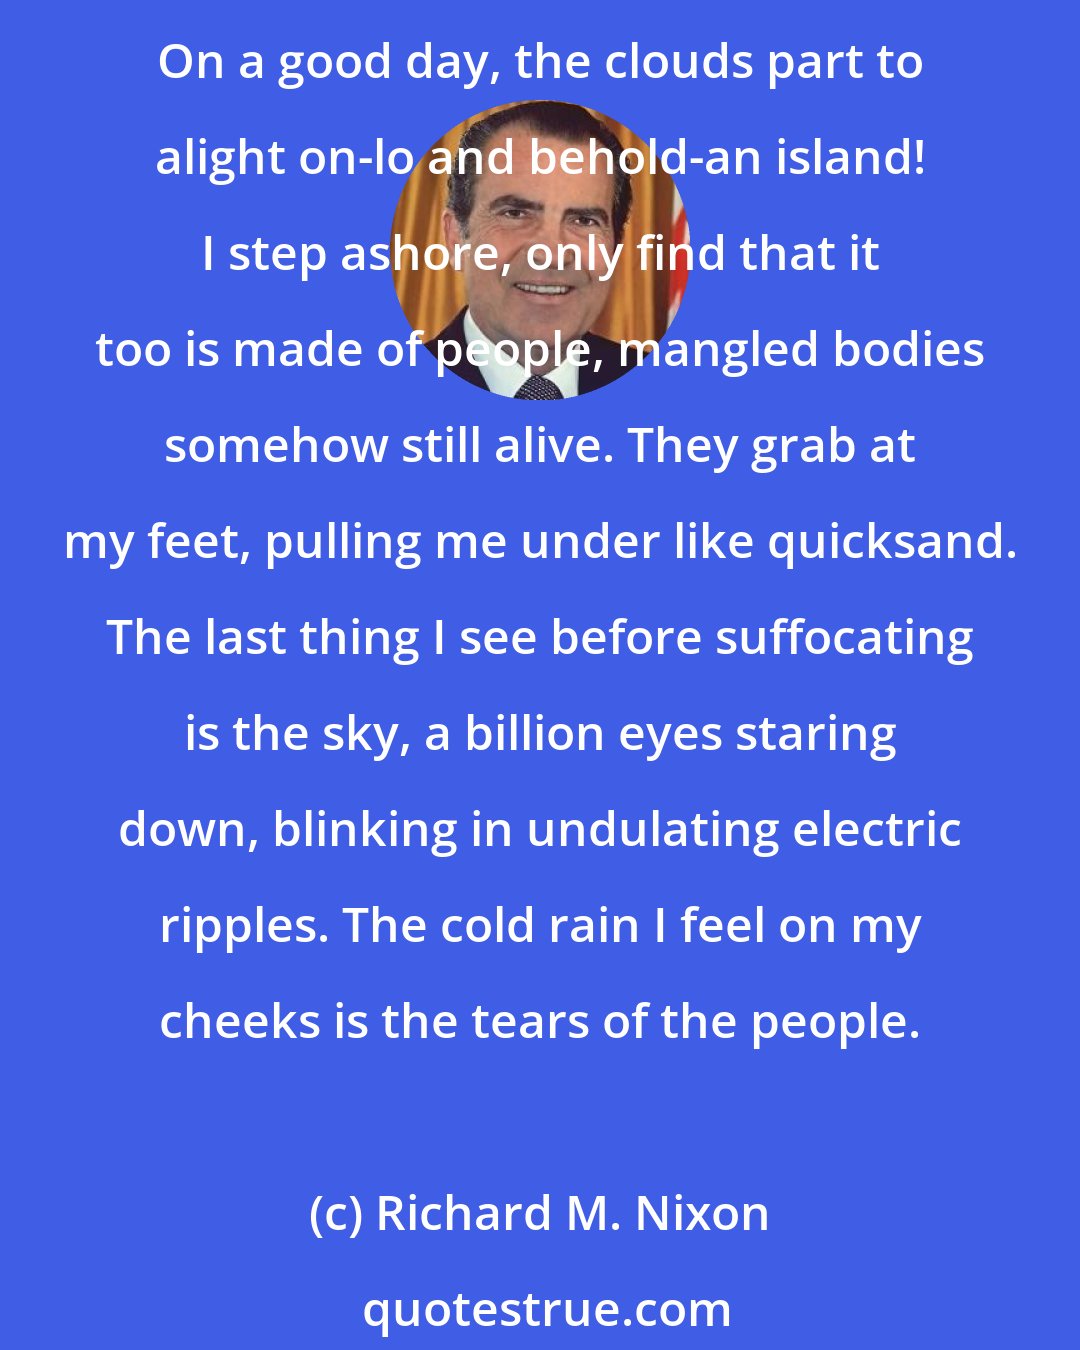 Richard M. Nixon: Most days I feel like the sole survivor of a shipwreck, rowing my paddleboat across a sea of people on waves made of an infinite array of hands and crests that reveal anonymous faces. On a good day, the clouds part to alight on-lo and behold-an island! I step ashore, only find that it too is made of people, mangled bodies somehow still alive. They grab at my feet, pulling me under like quicksand. The last thing I see before suffocating is the sky, a billion eyes staring down, blinking in undulating electric ripples. The cold rain I feel on my cheeks is the tears of the people.